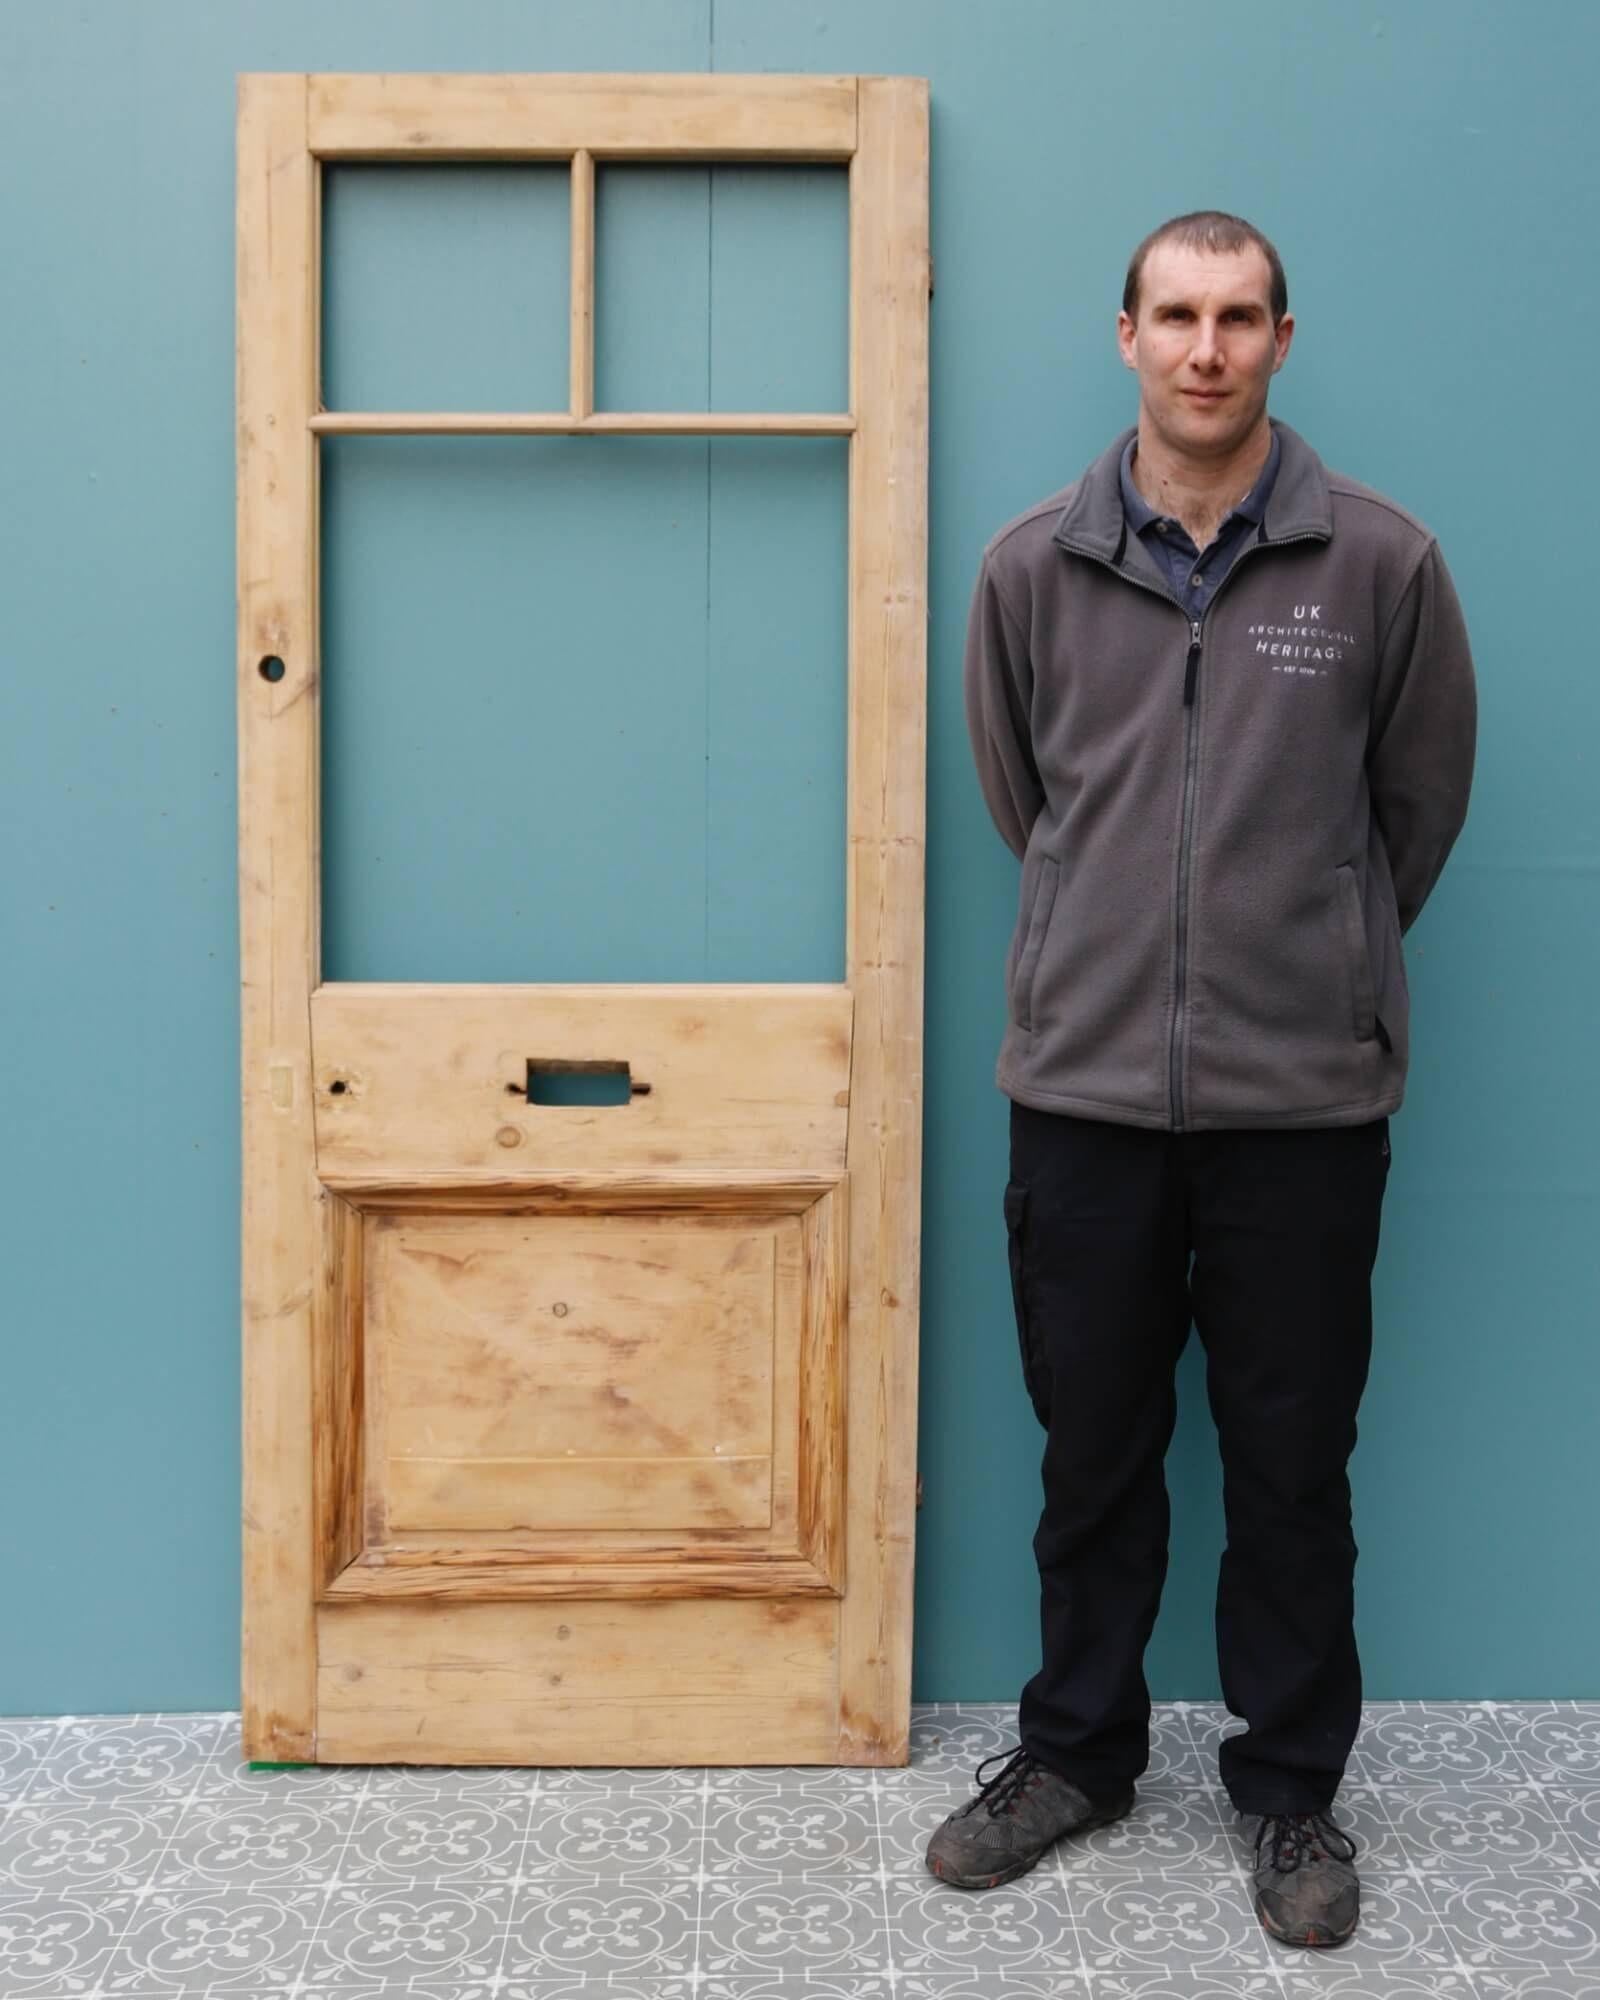 A smart unglazed reclaimed Edwardian pine front door circa 1890, perfect for the entrance of a Victorian era townhouse or period property. Made in sturdy pine, this antique door features 3 panels for glazing above a raised pyramid panel to the front